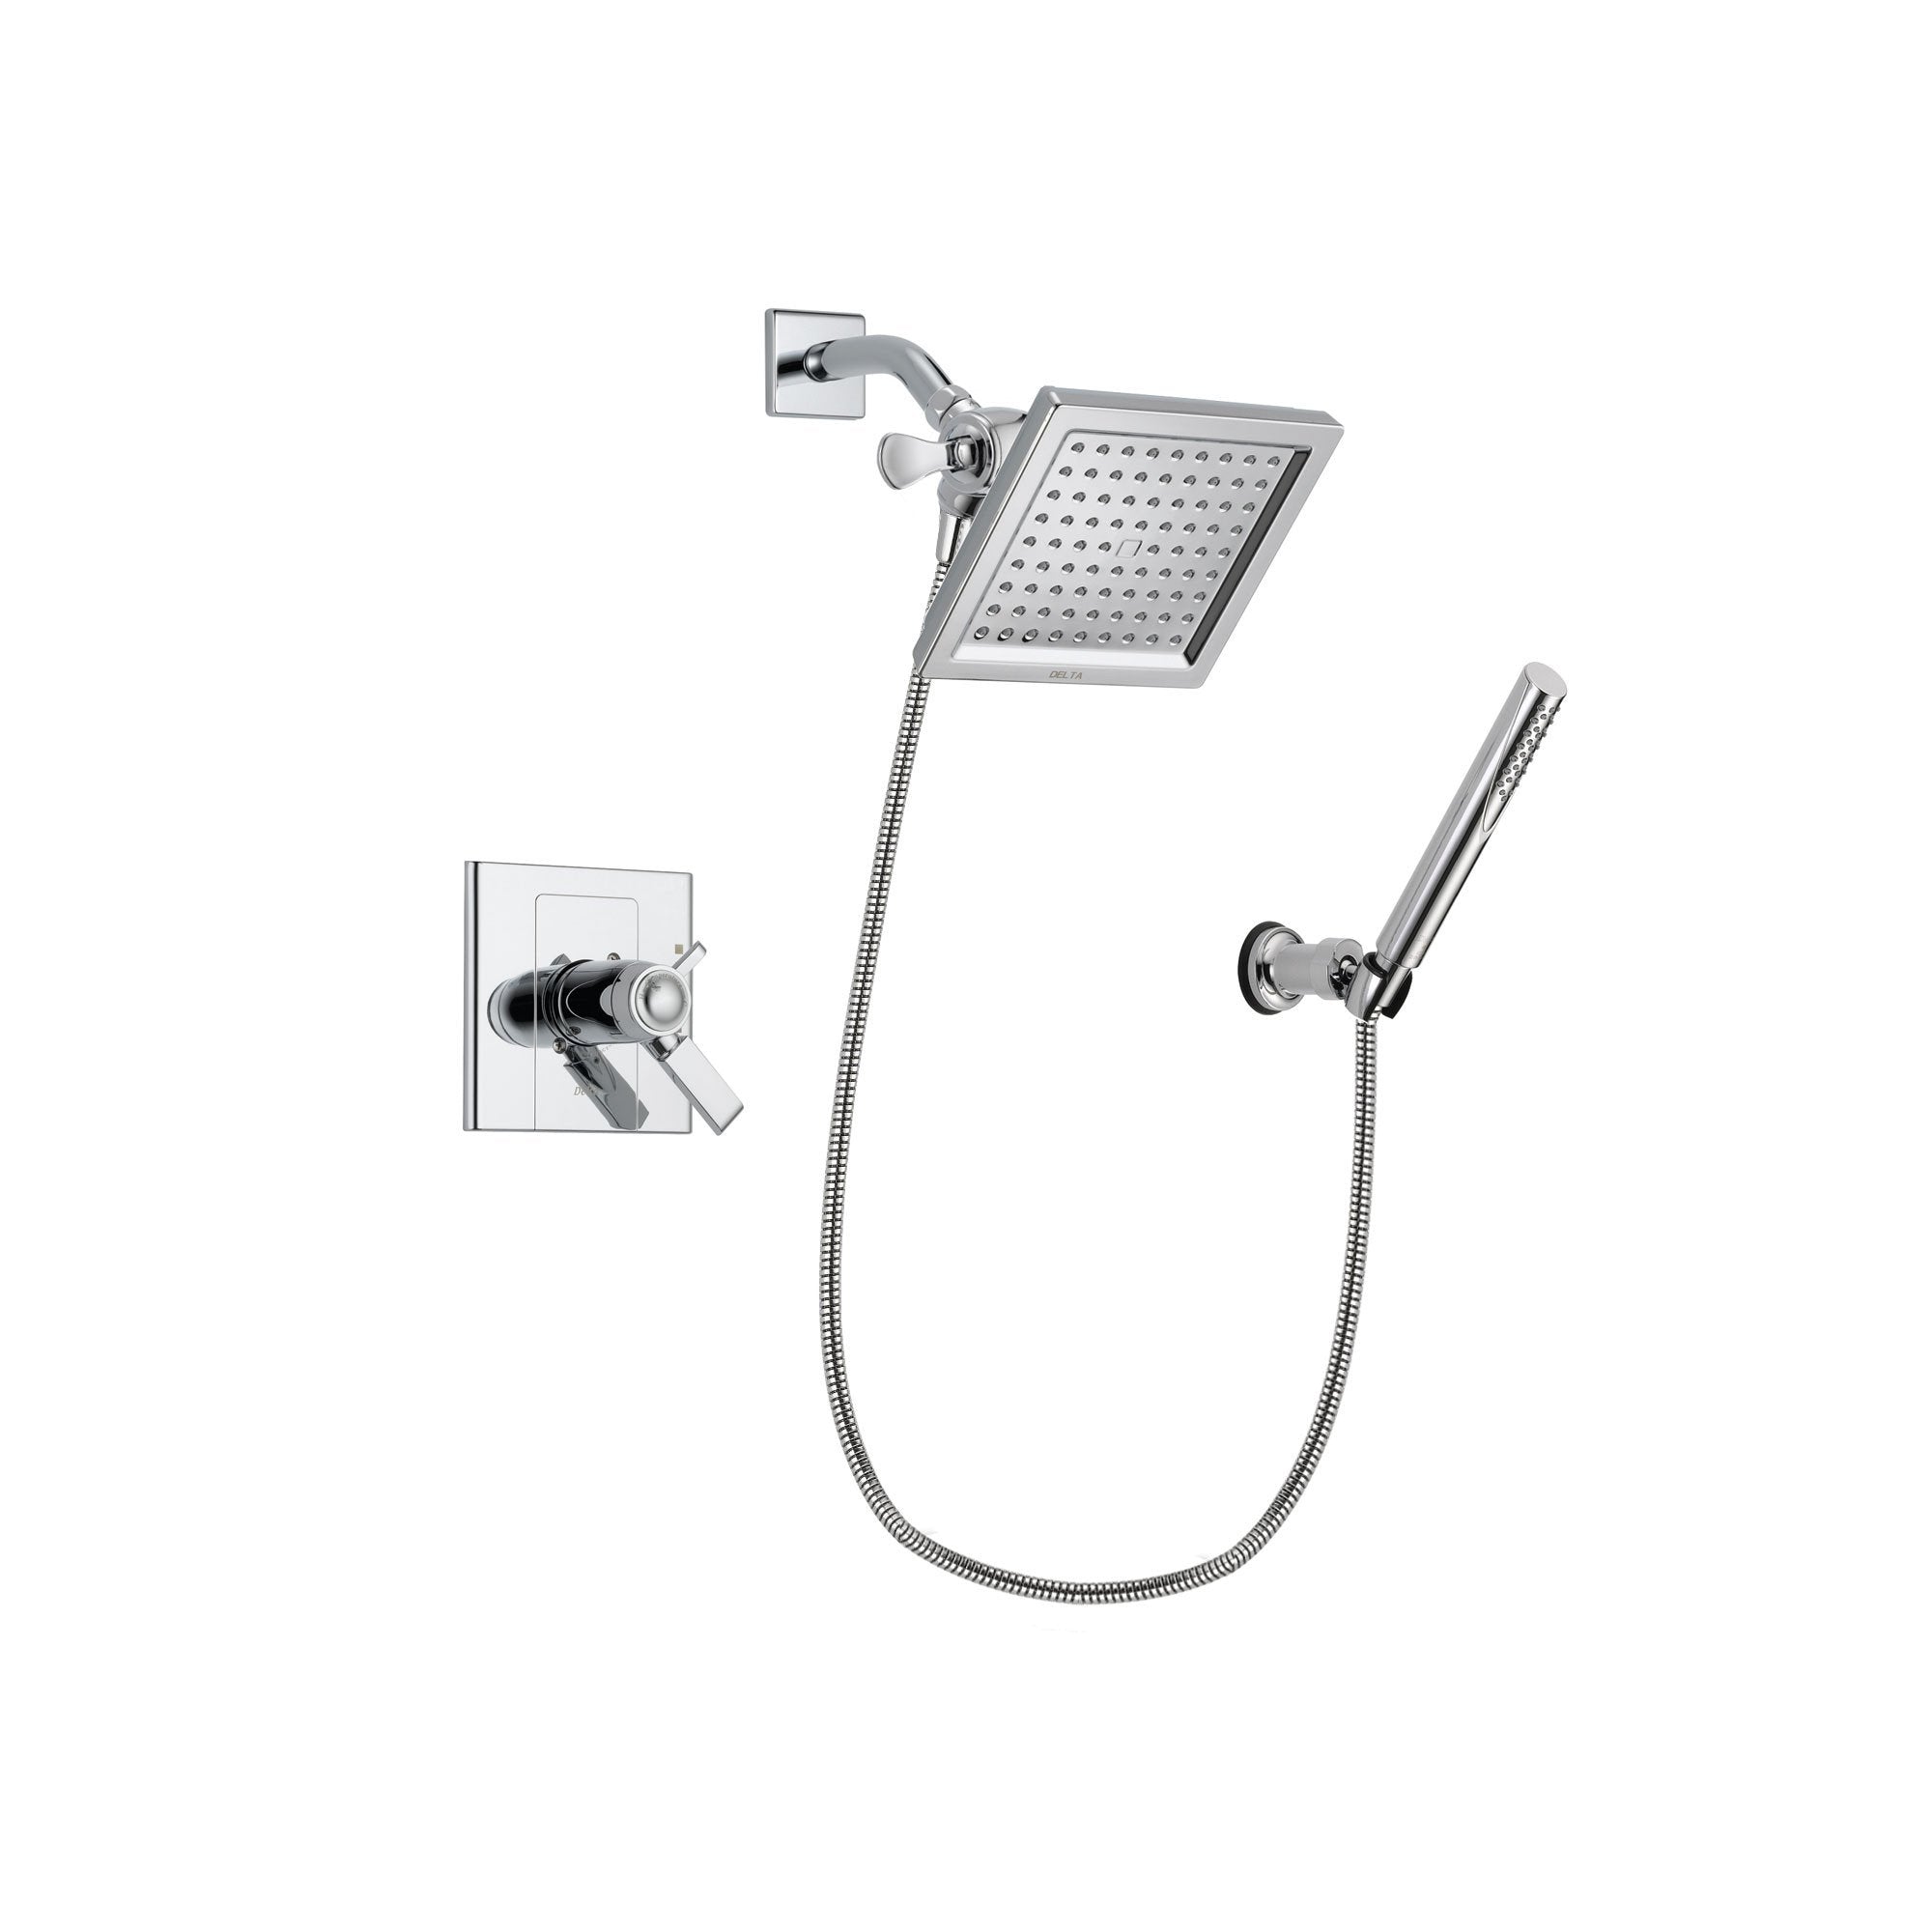 Delta Arzo Chrome Finish Thermostatic Shower Faucet System Package with 6.5-inch Square Rain Showerhead and Modern Handheld Shower Spray with Wall Bracket and Hose Includes Rough-in Valve DSP0069V